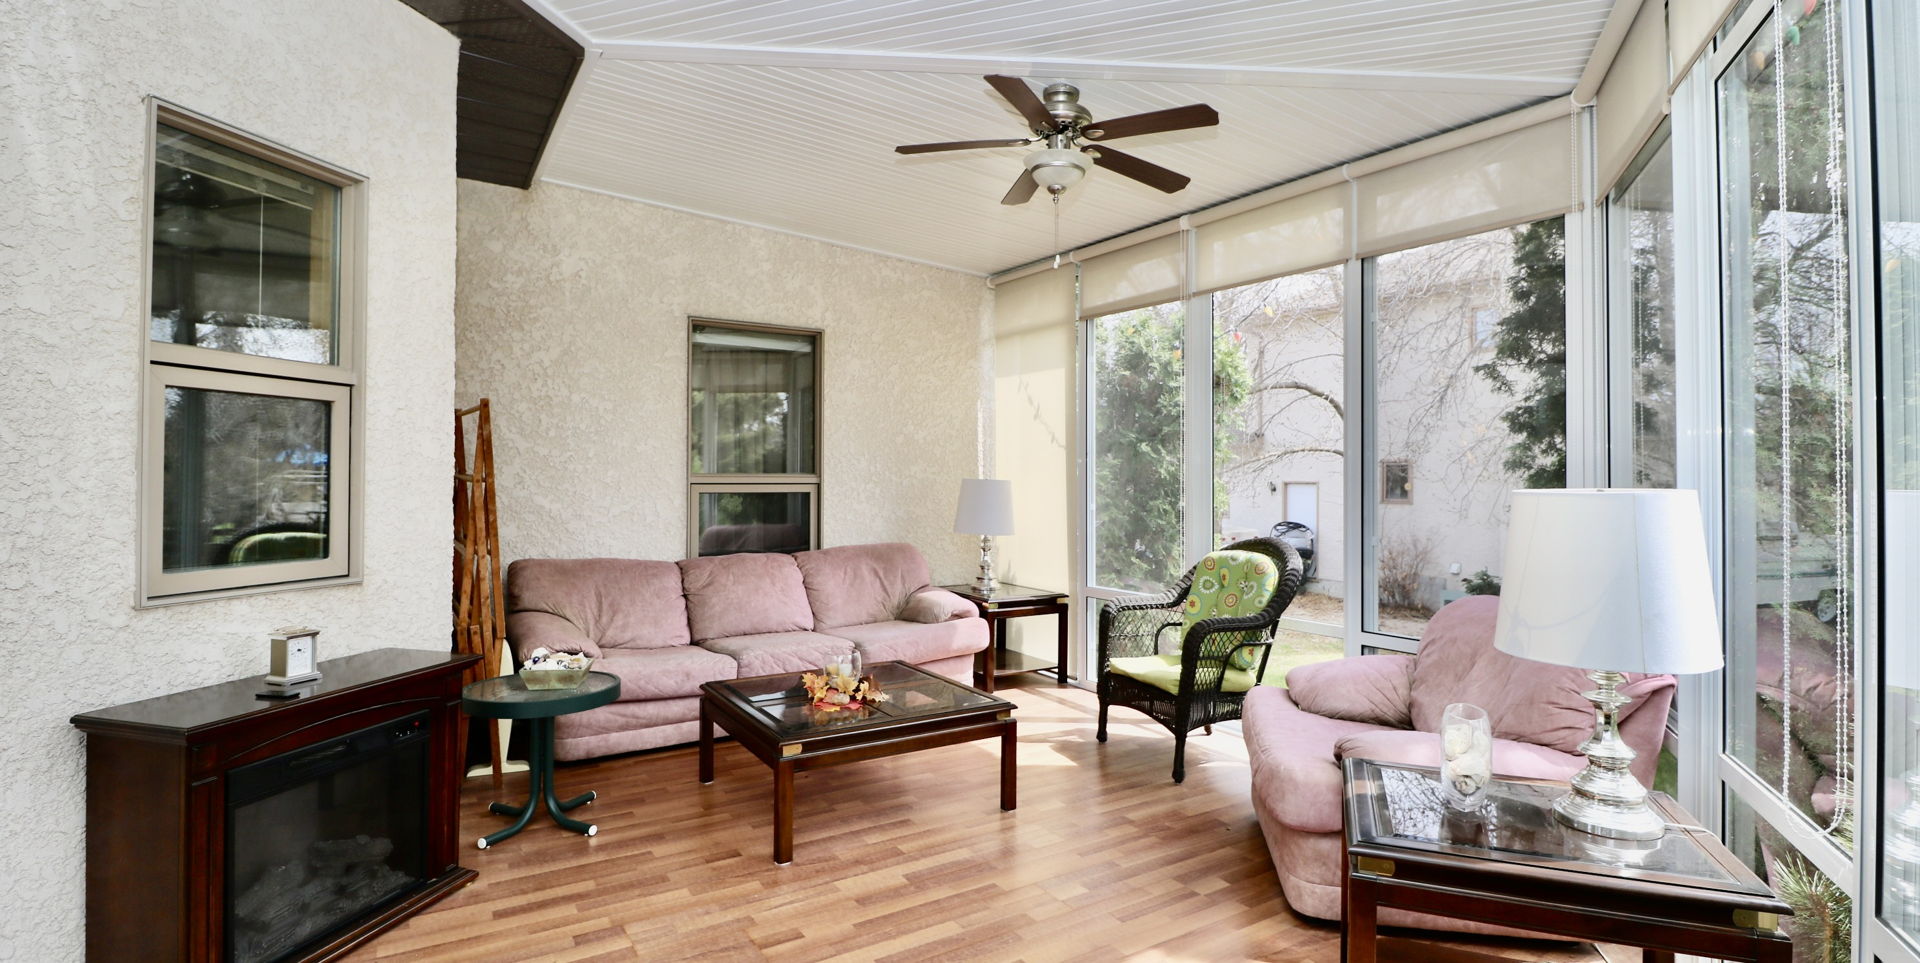 sunroom featuring hardwood flooring and a ceiling fan